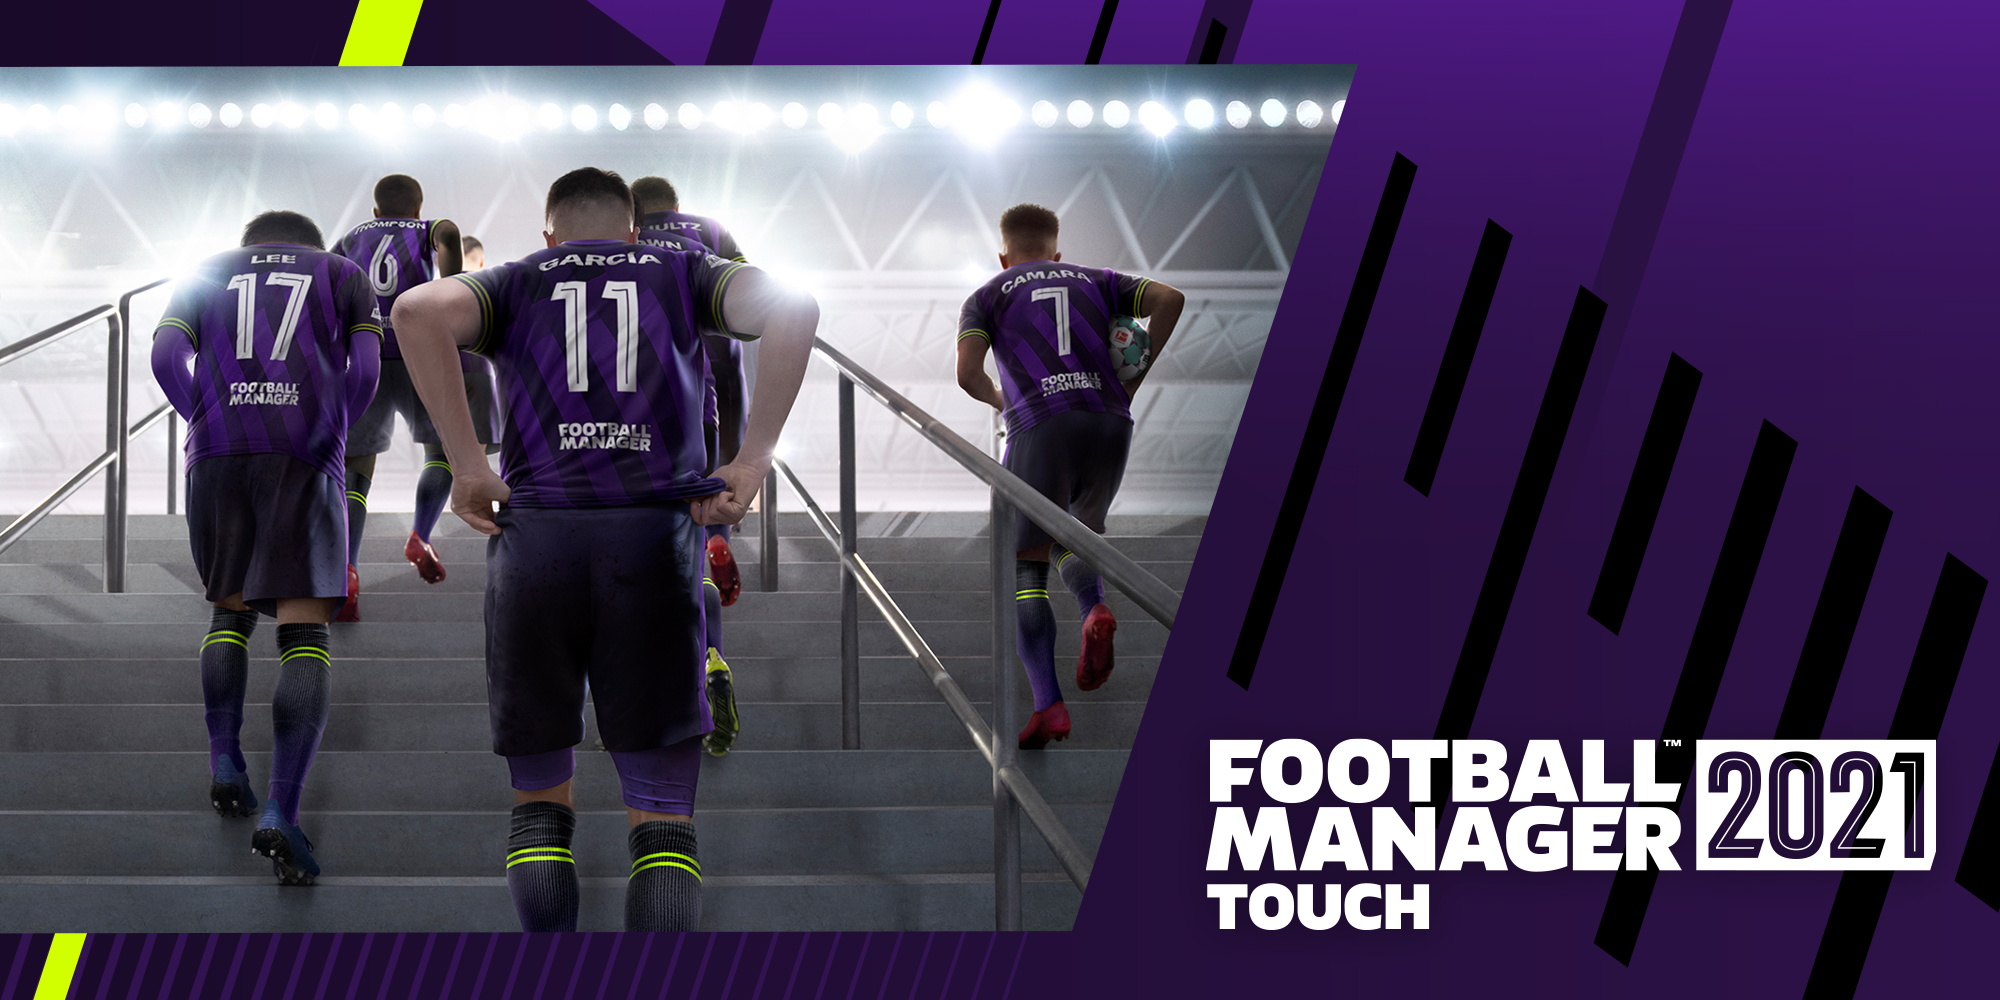 Football Manager Touch 2018 Review - Review - Nintendo World Report